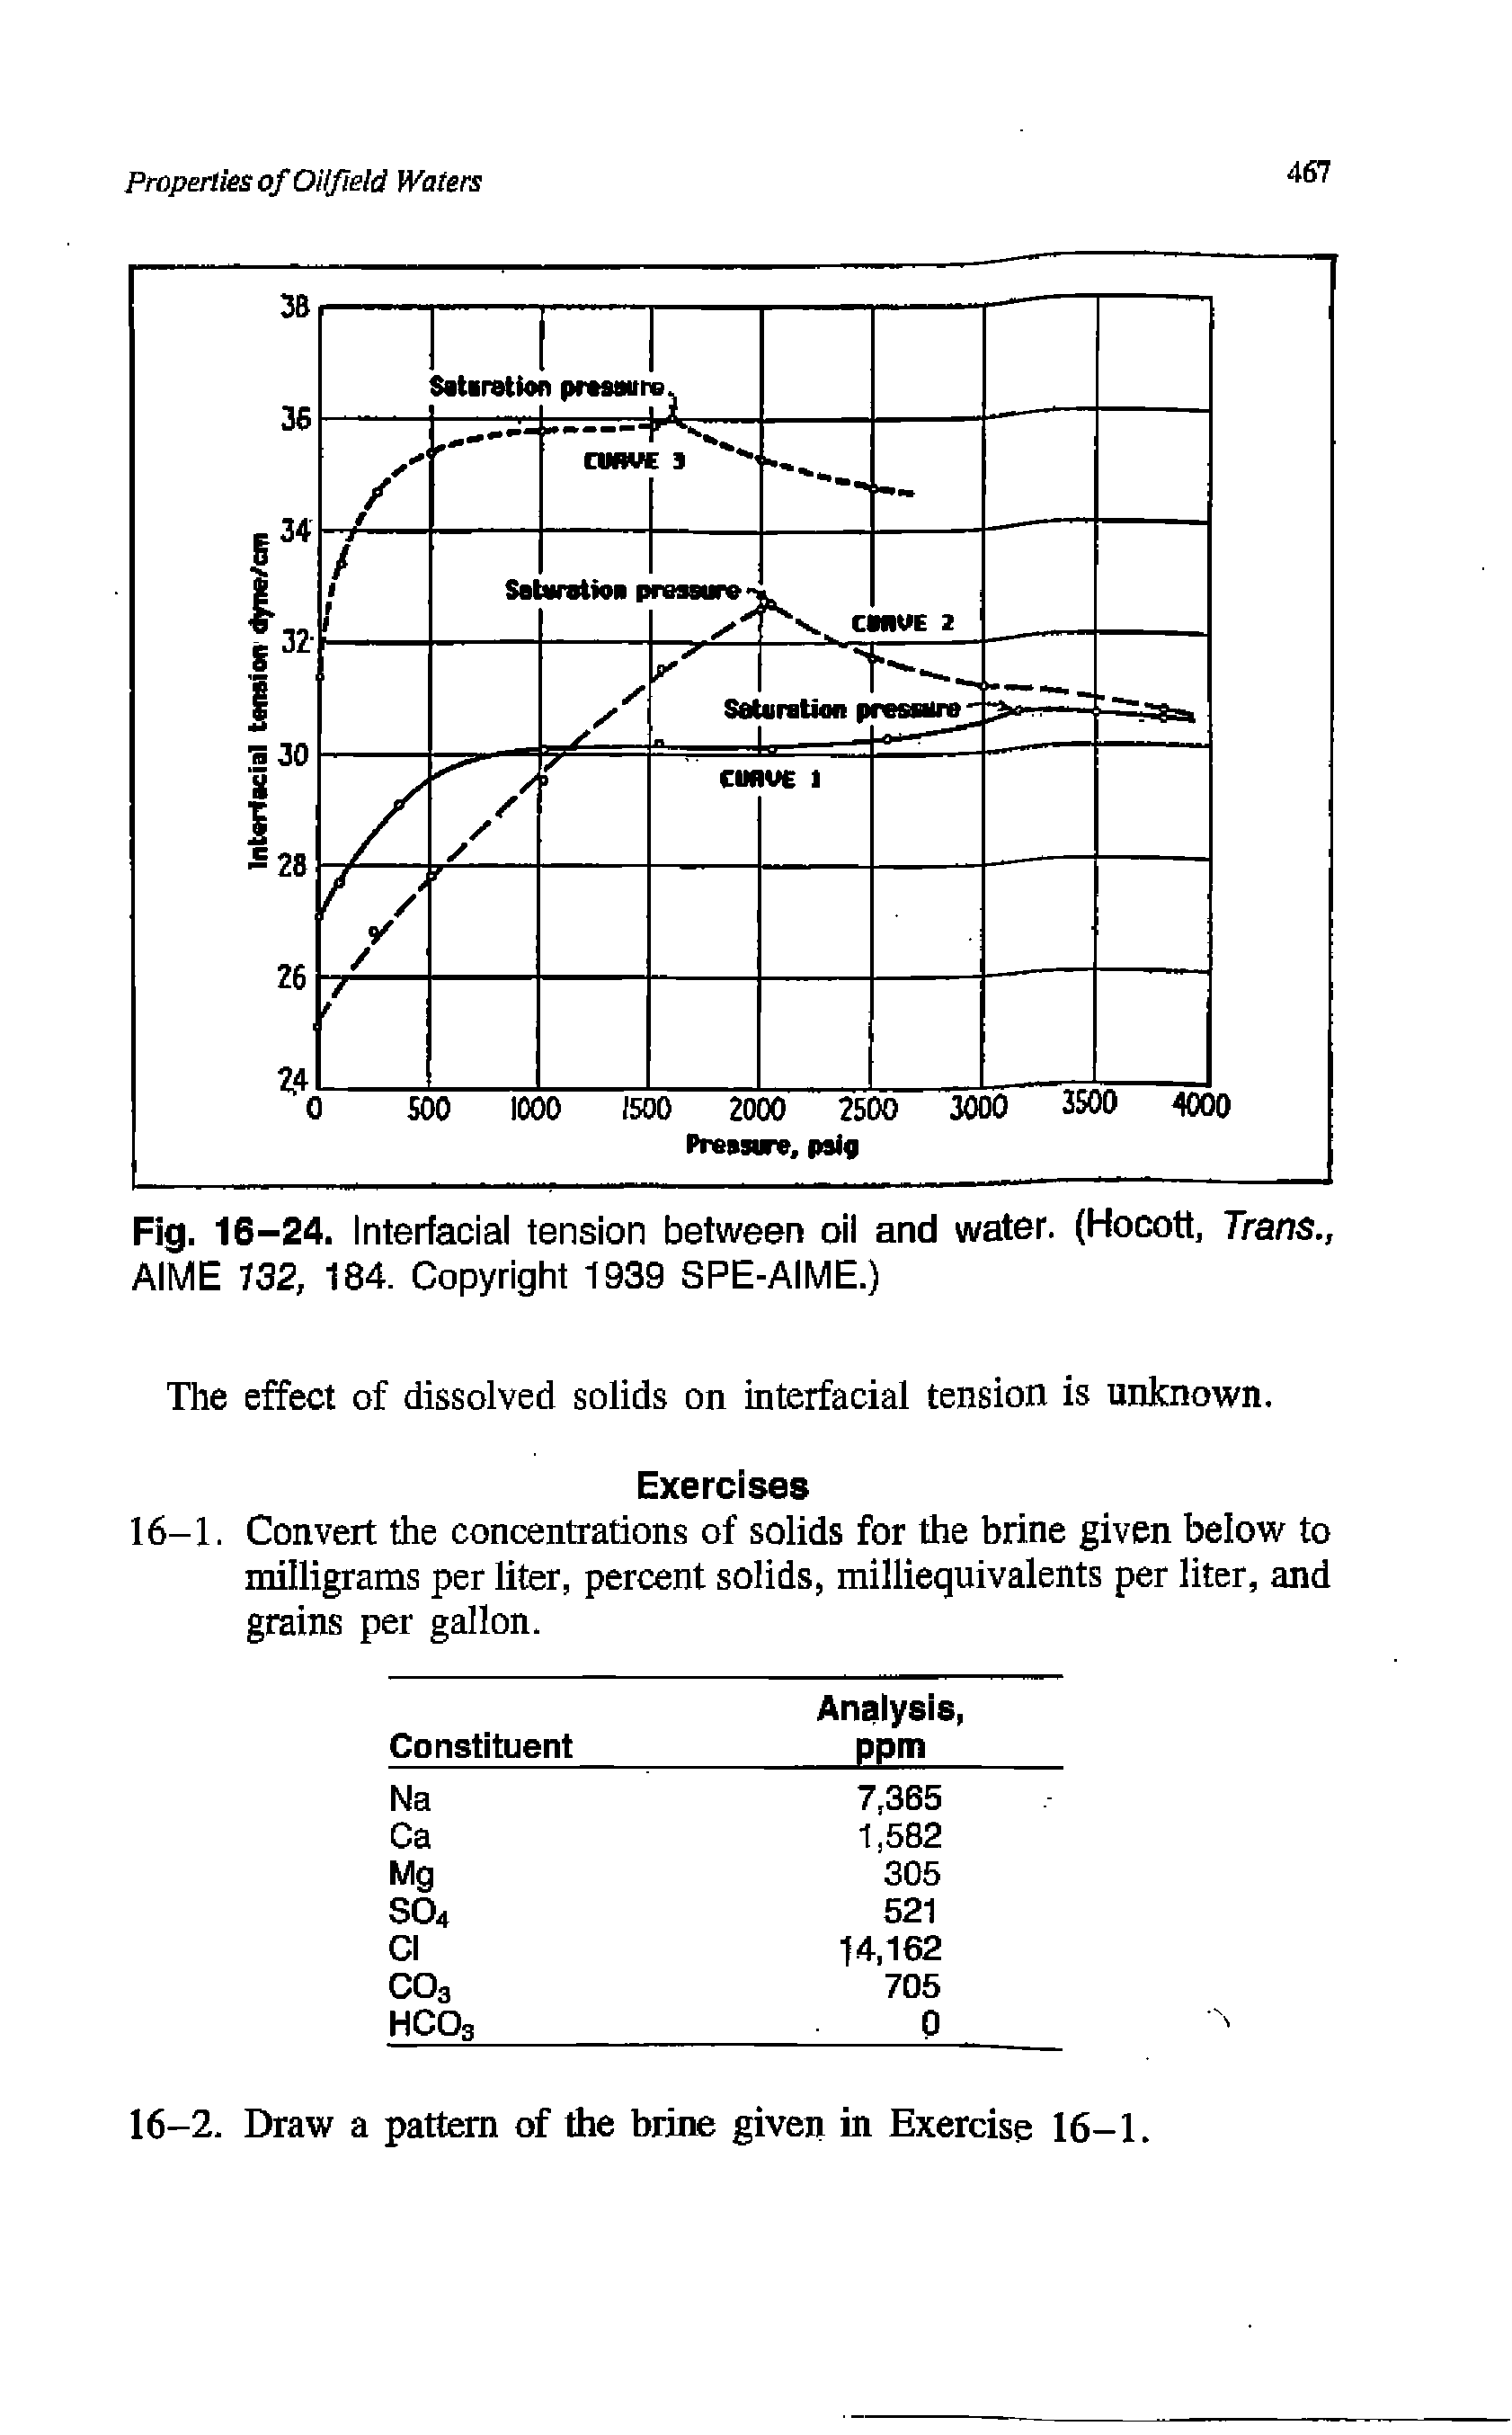 Fig. 16-24. Interfacial tension between oil and water. (Hocott, Trans., AIME 132, 184. Copyright 1939 SPE-AIME.)...